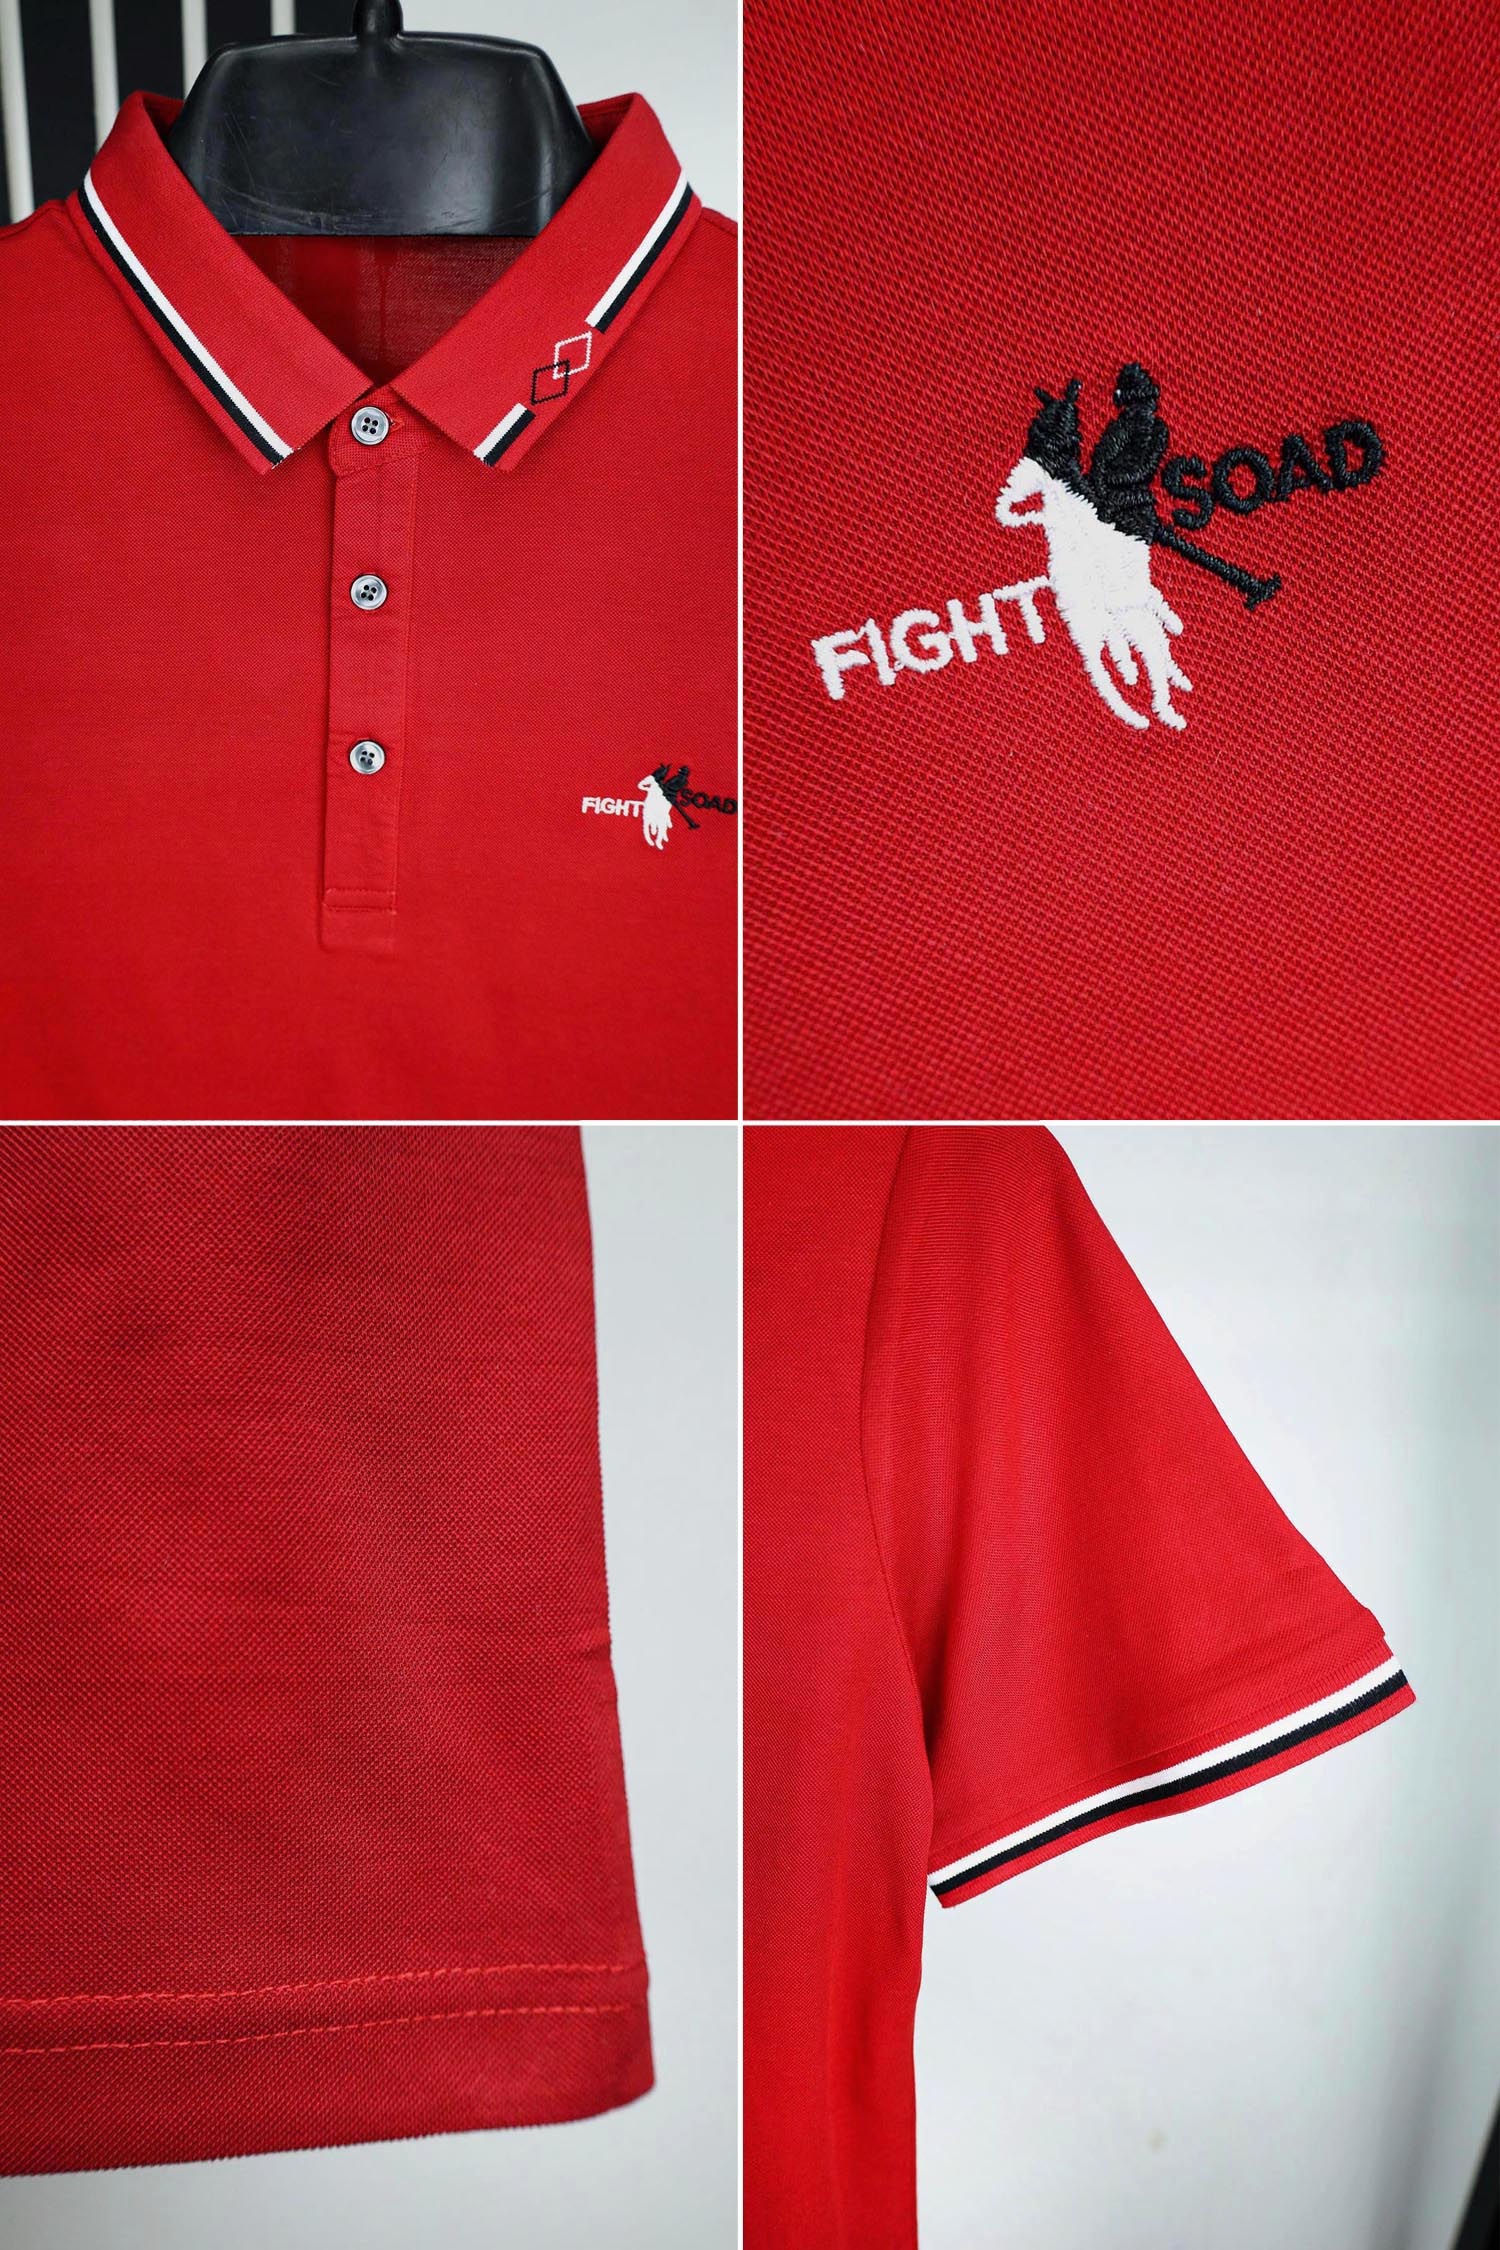 Fight Soad Front Logo Polo Shirts